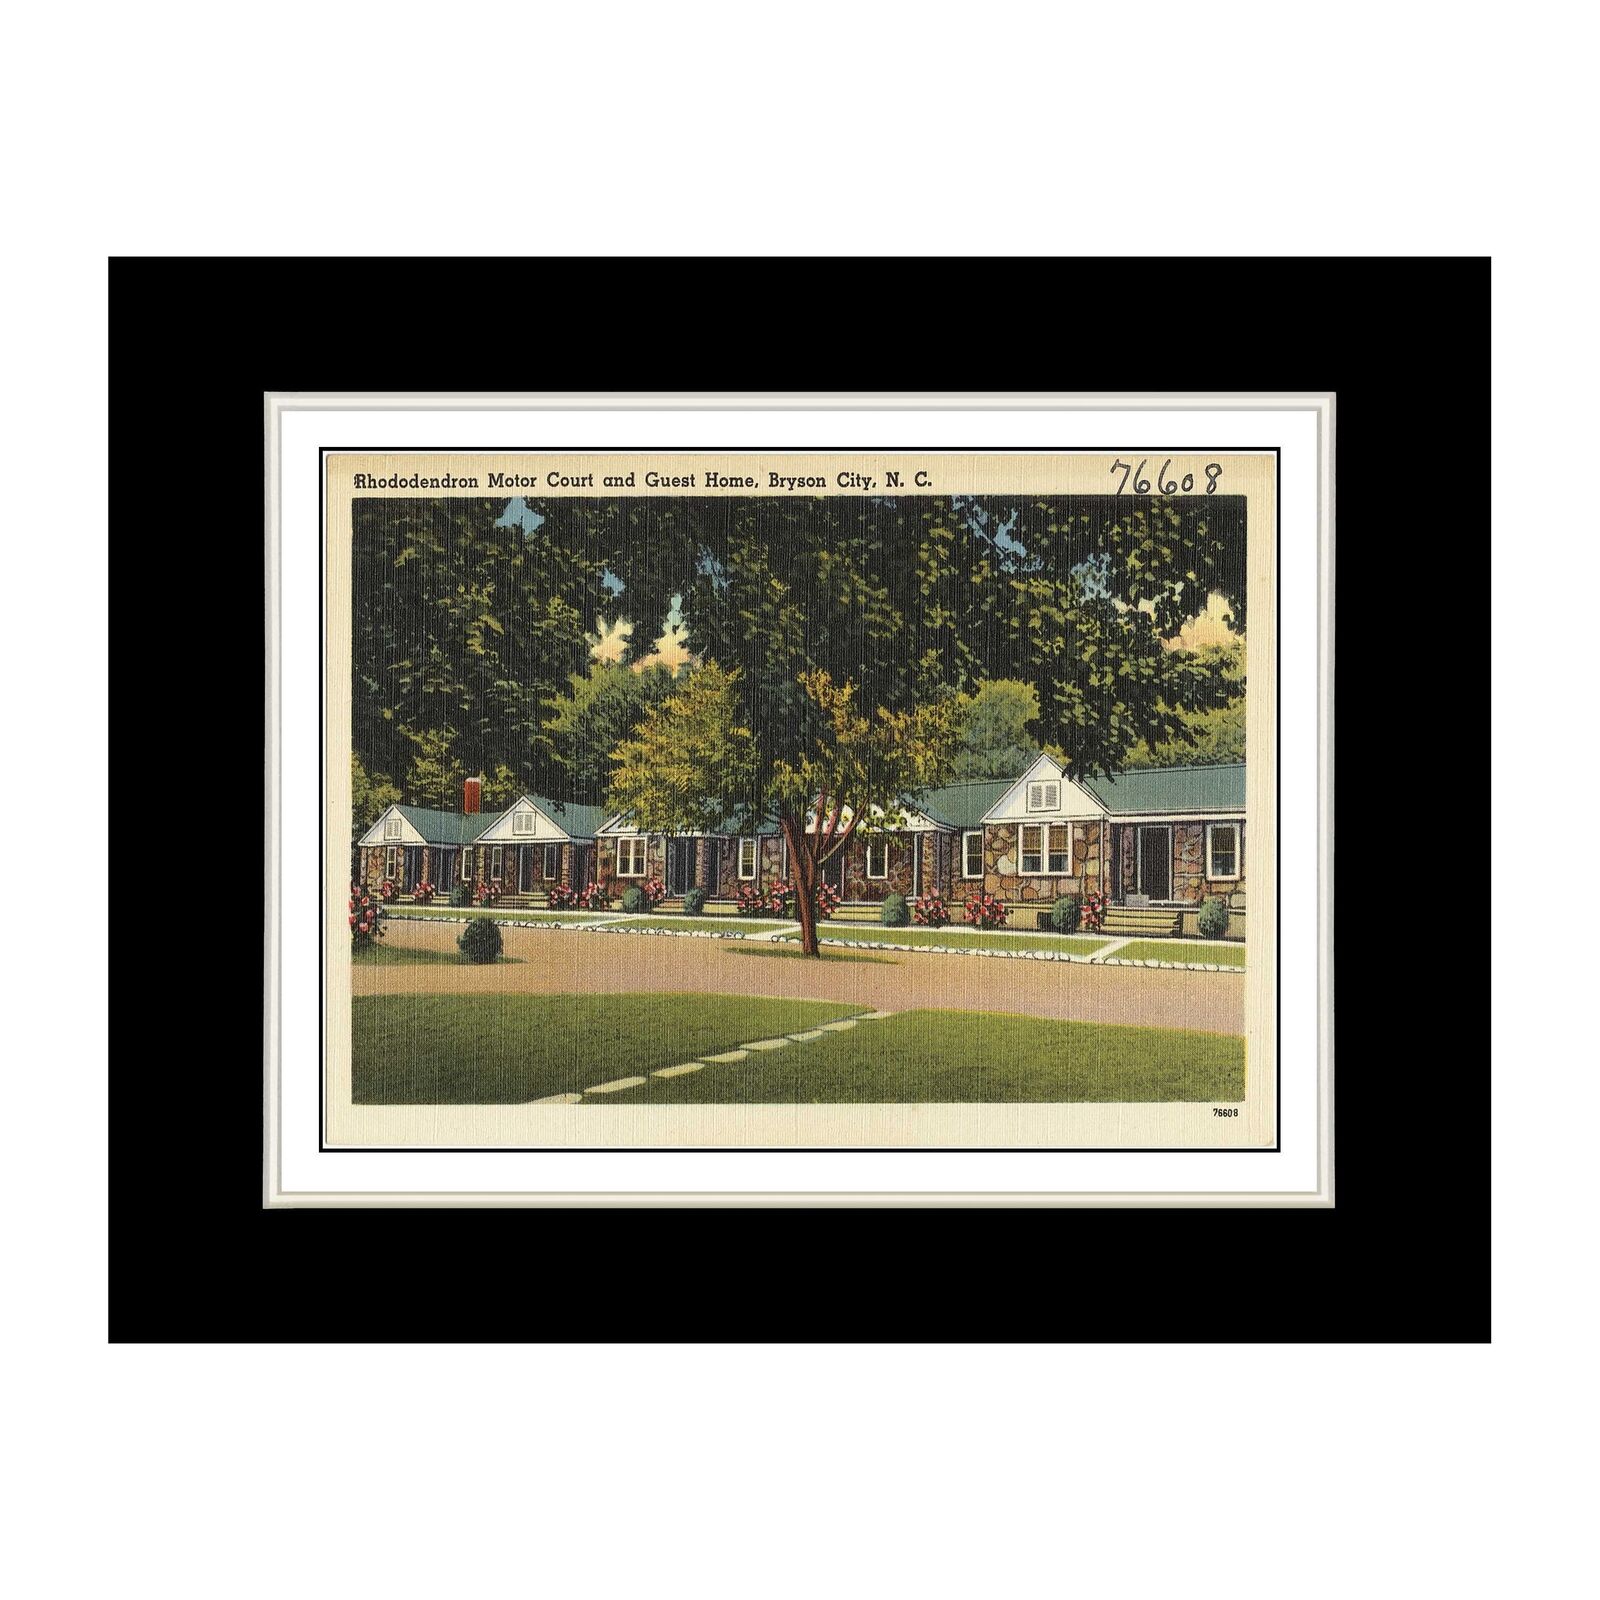 Art Print - North Carolina Postcard - Rhododendron Motor Court and Guest Home,